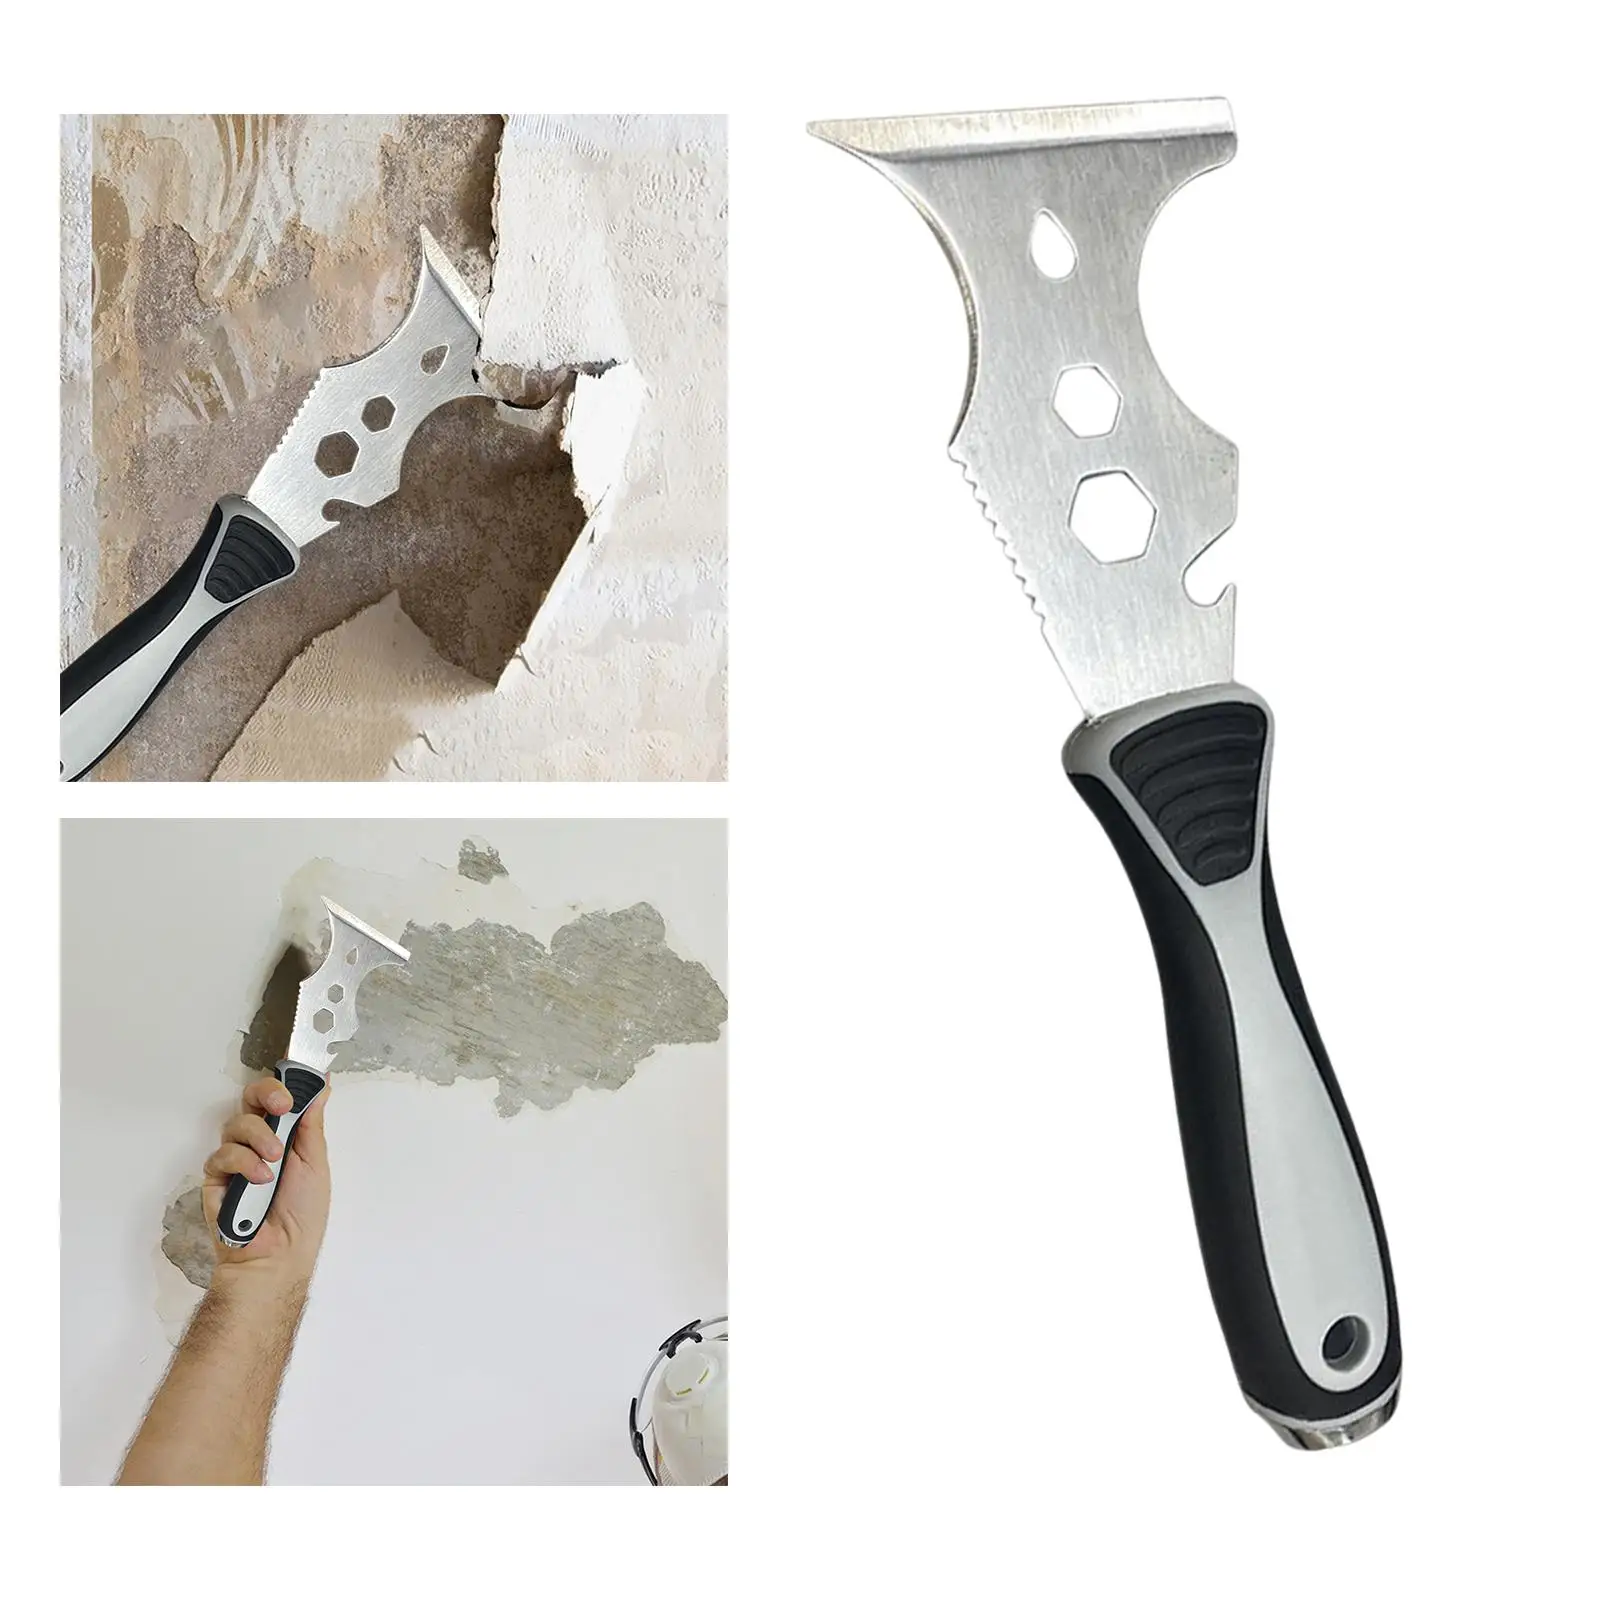 Stainless Steel Paint Scraper Removal Tool Wallpaper Scraper Professional Multi Use Putty Knife for Home Decoration